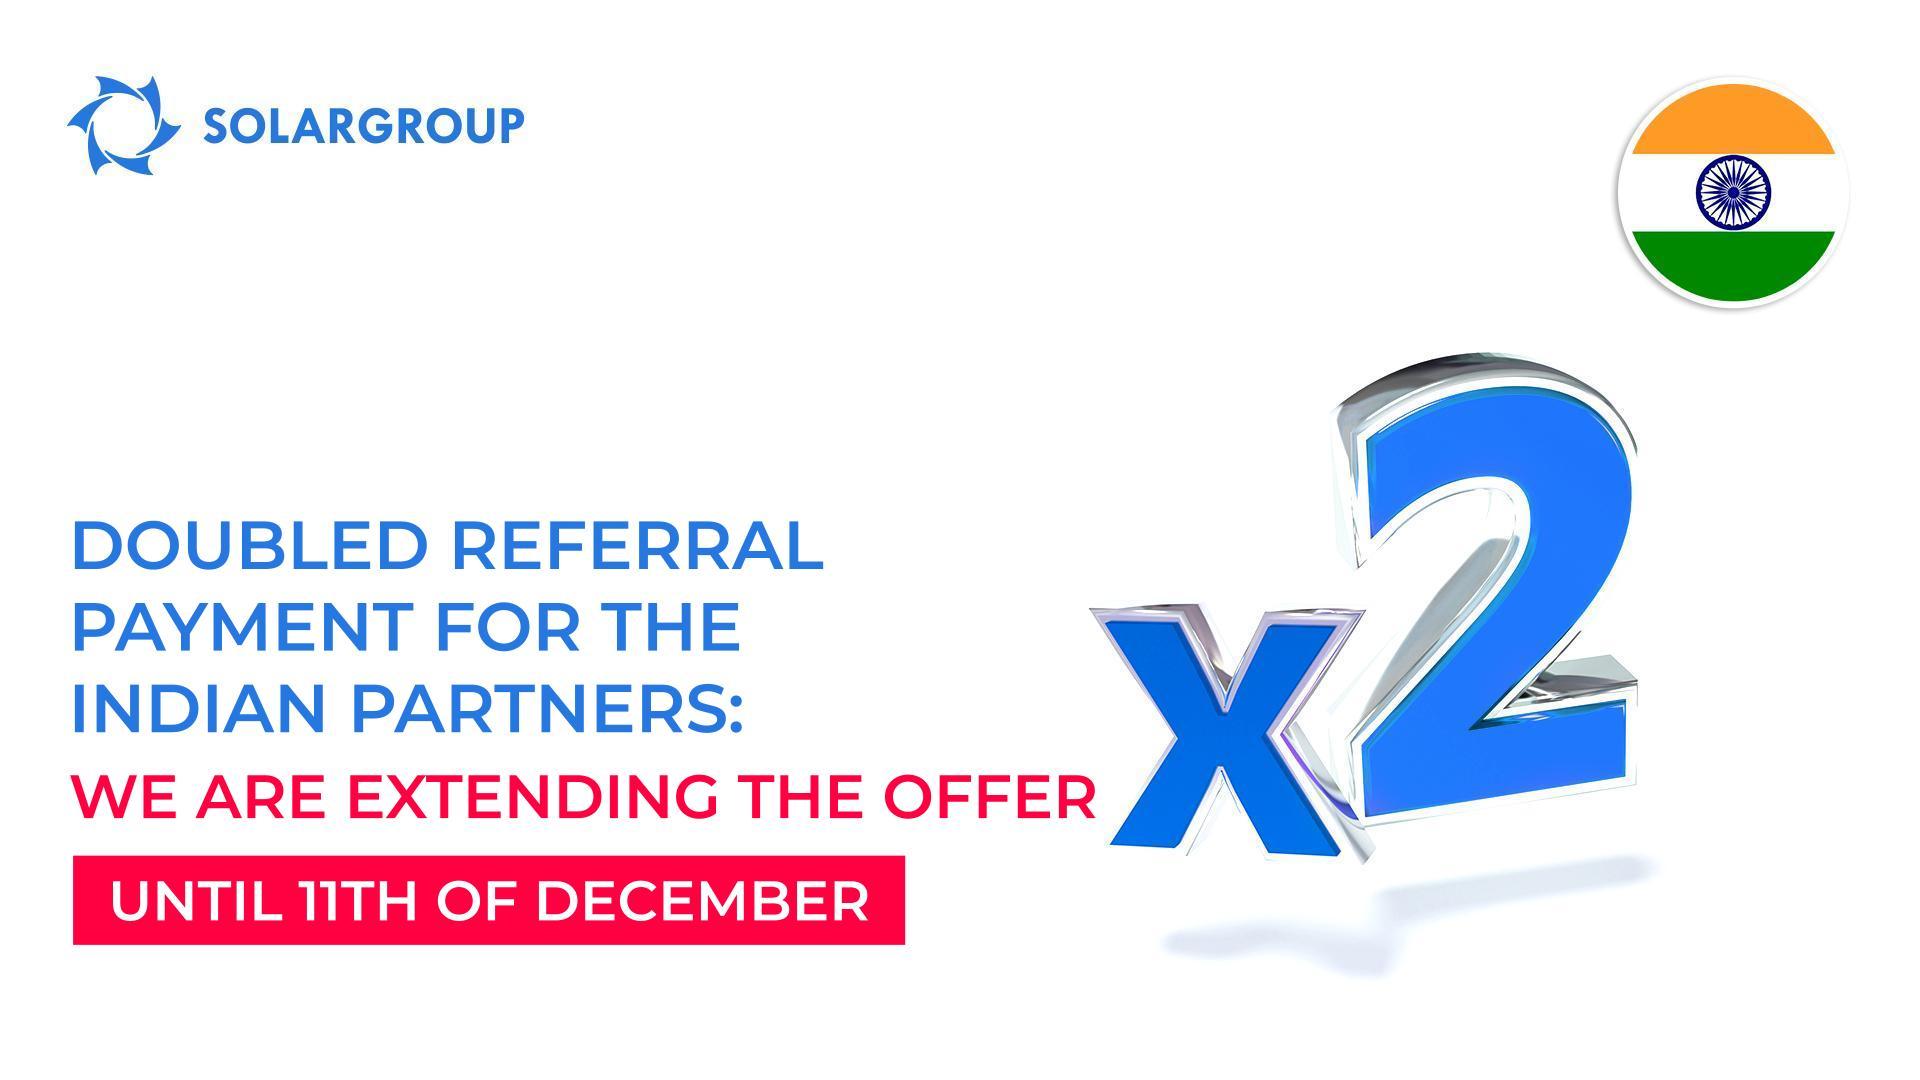 Doubled referral payment for the Indian partners: we are extending the offer until 11th of December